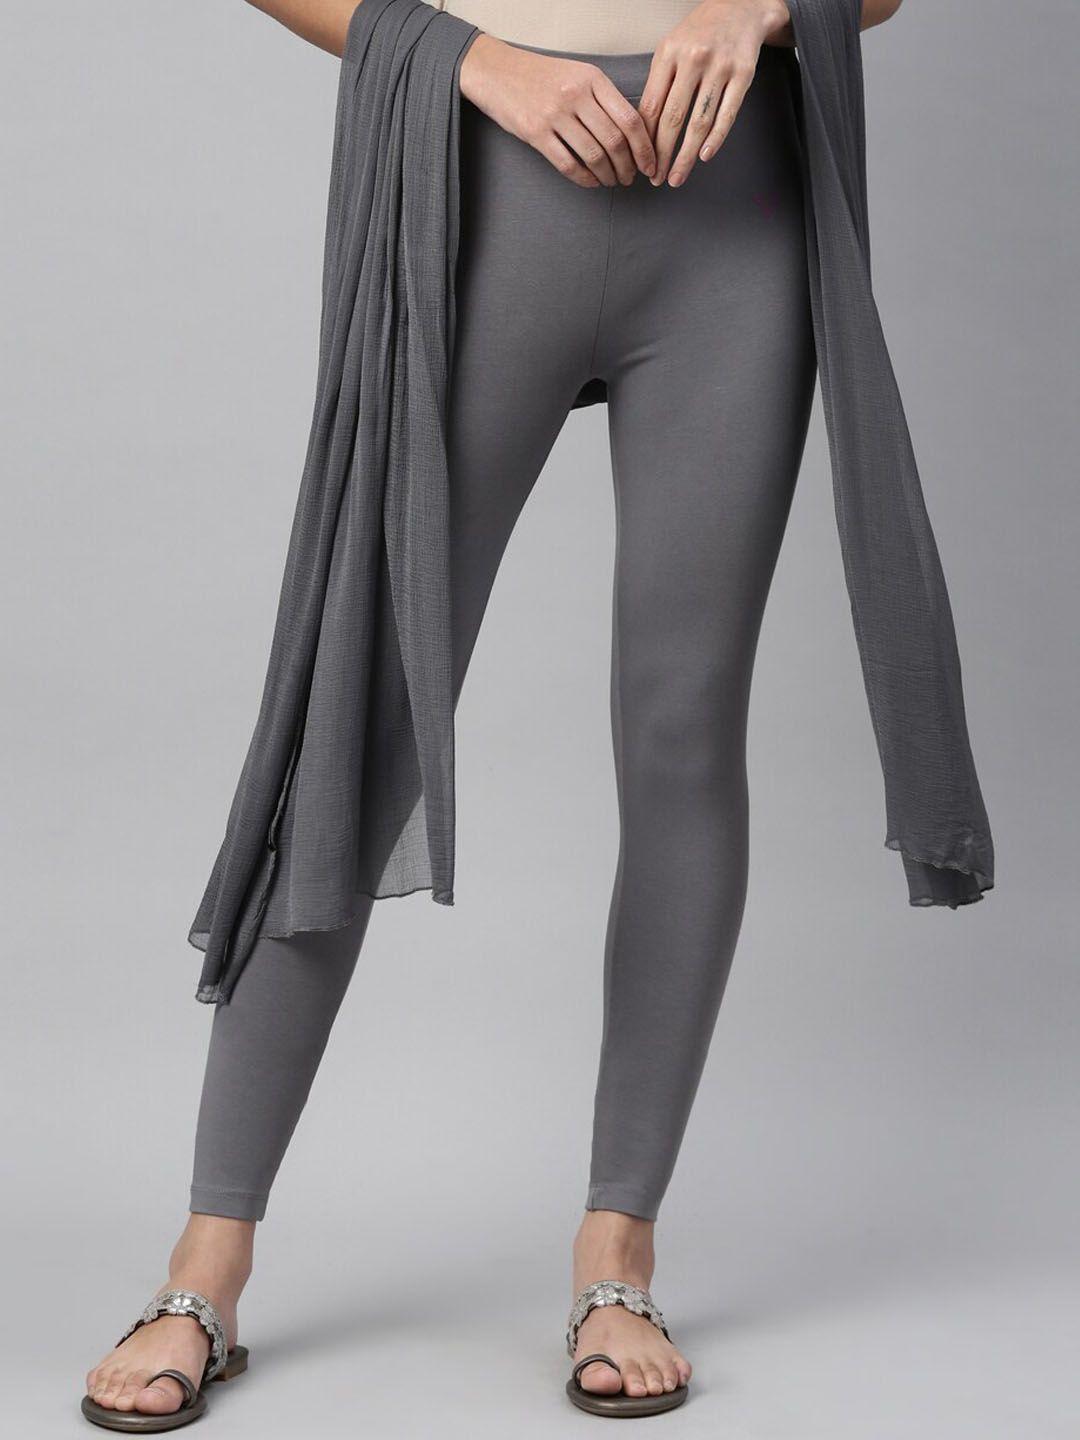 twin-birds-ankle-length-leggings-with-dupatta